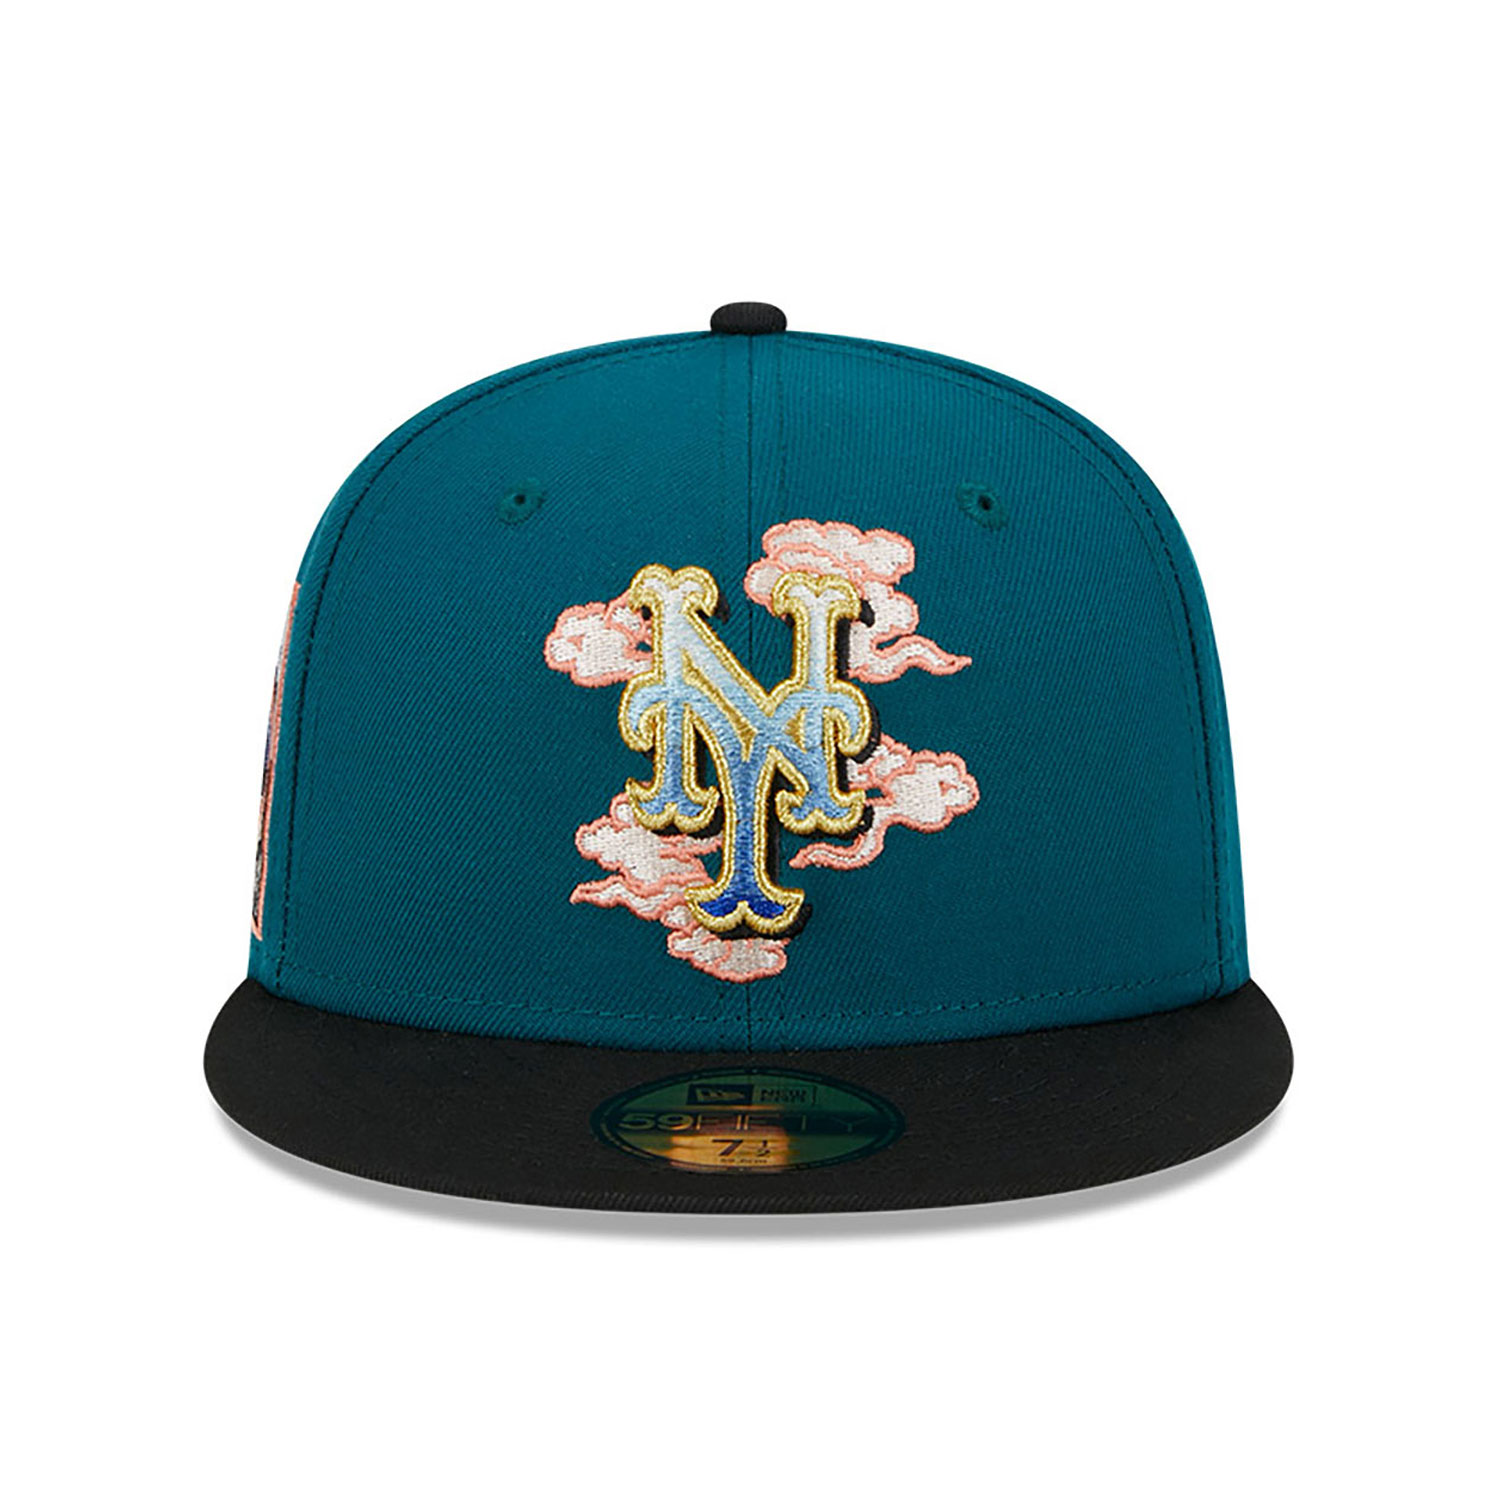 New York Mets Cloud Spiral Dark Green 59FIFTY Fitted Cap